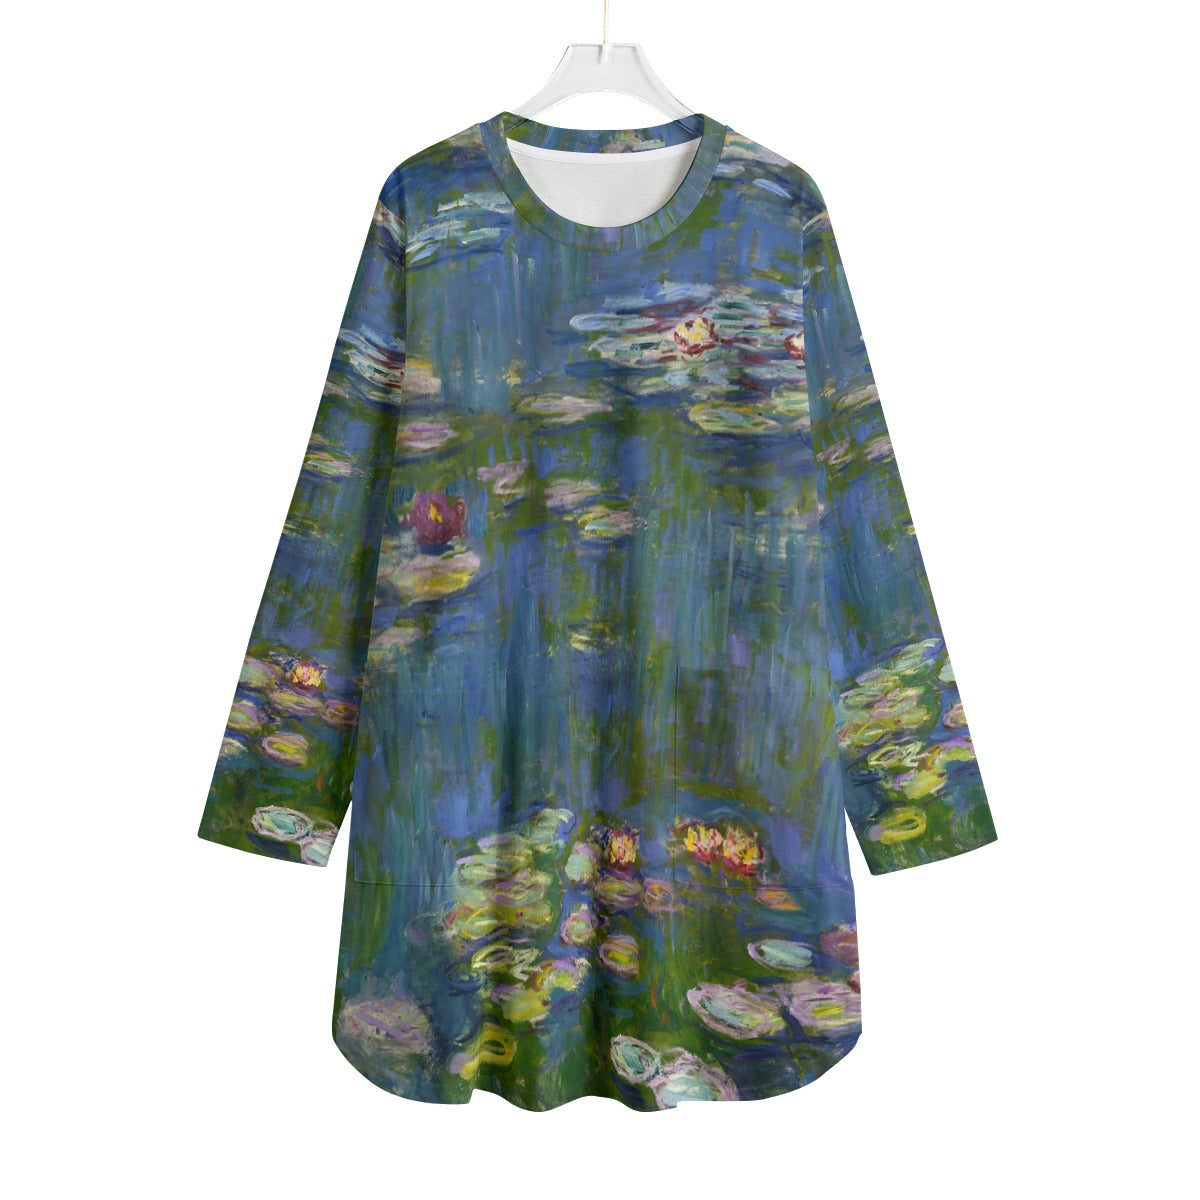 Delicately crafted cotton dress featuring Claude Monet's iconic water lilies.